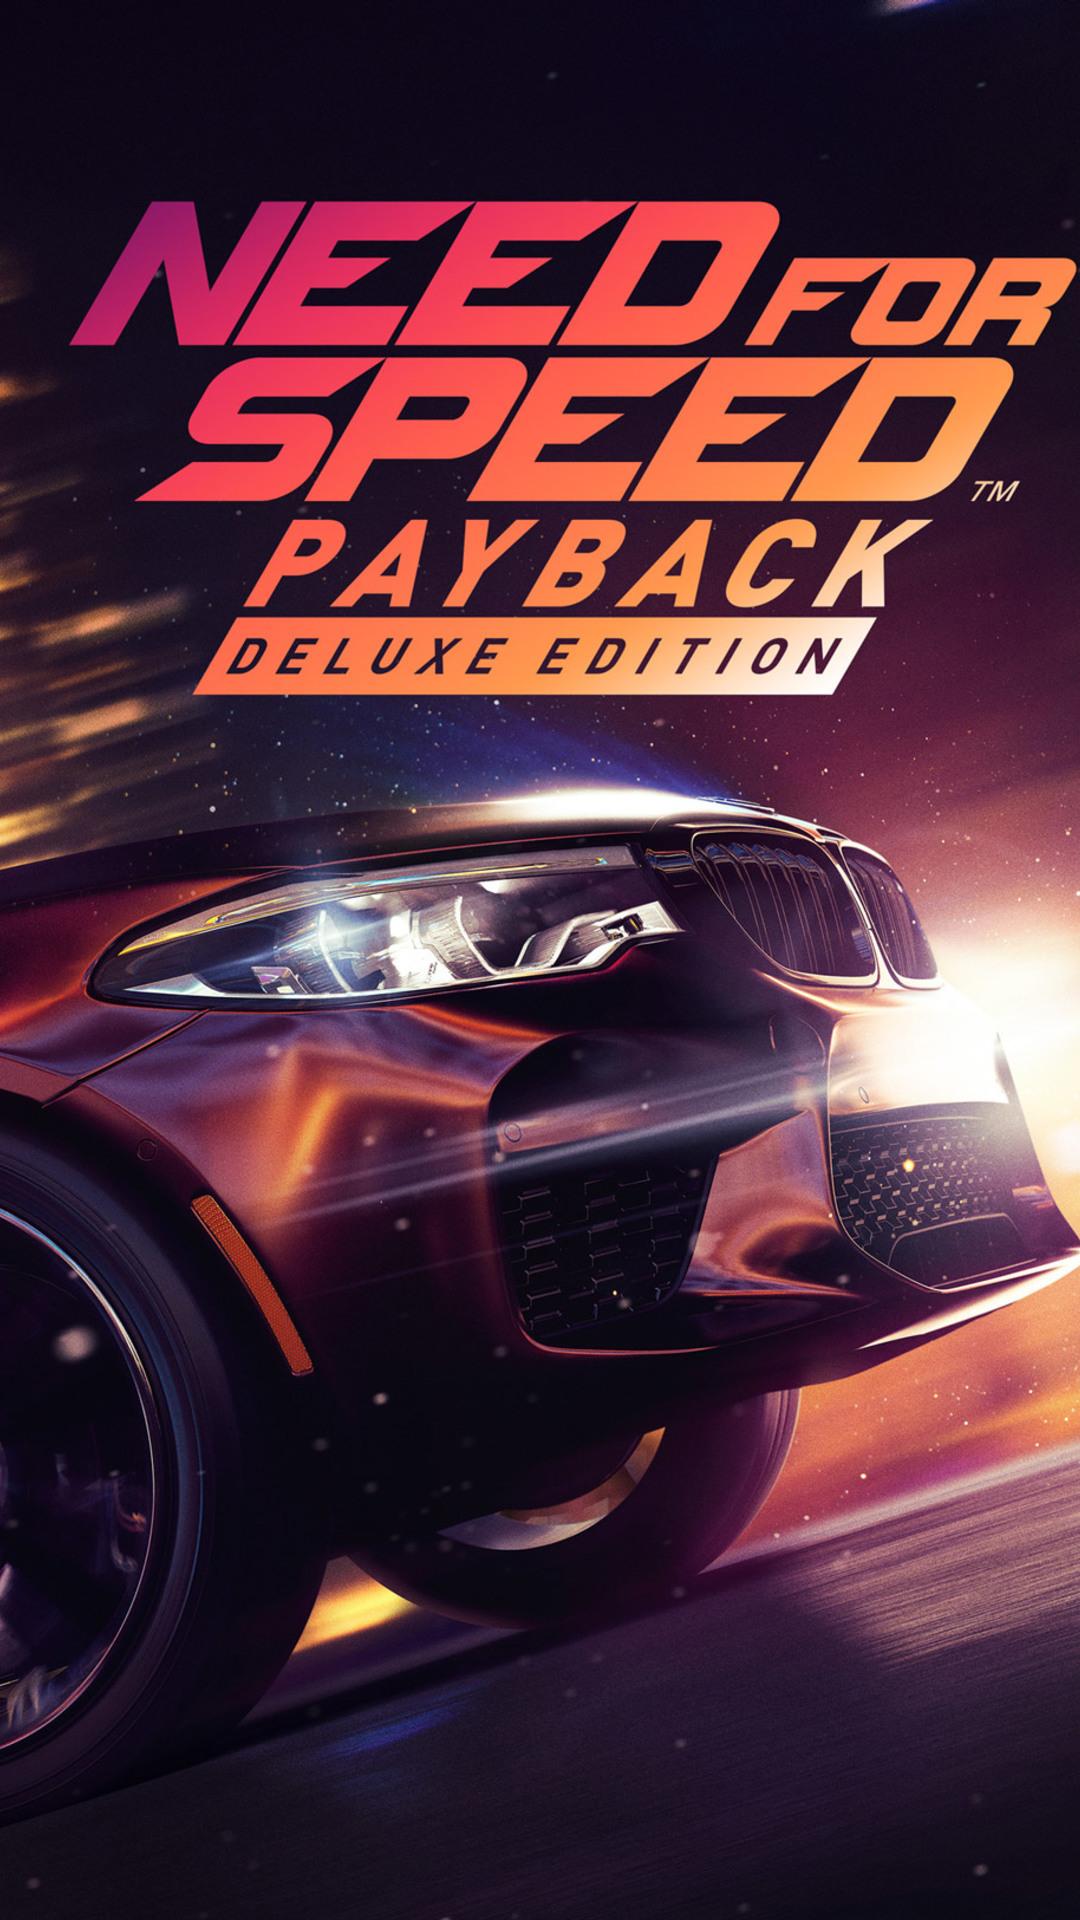 Need for Speed Payback htc one wallpaper, free and easy to